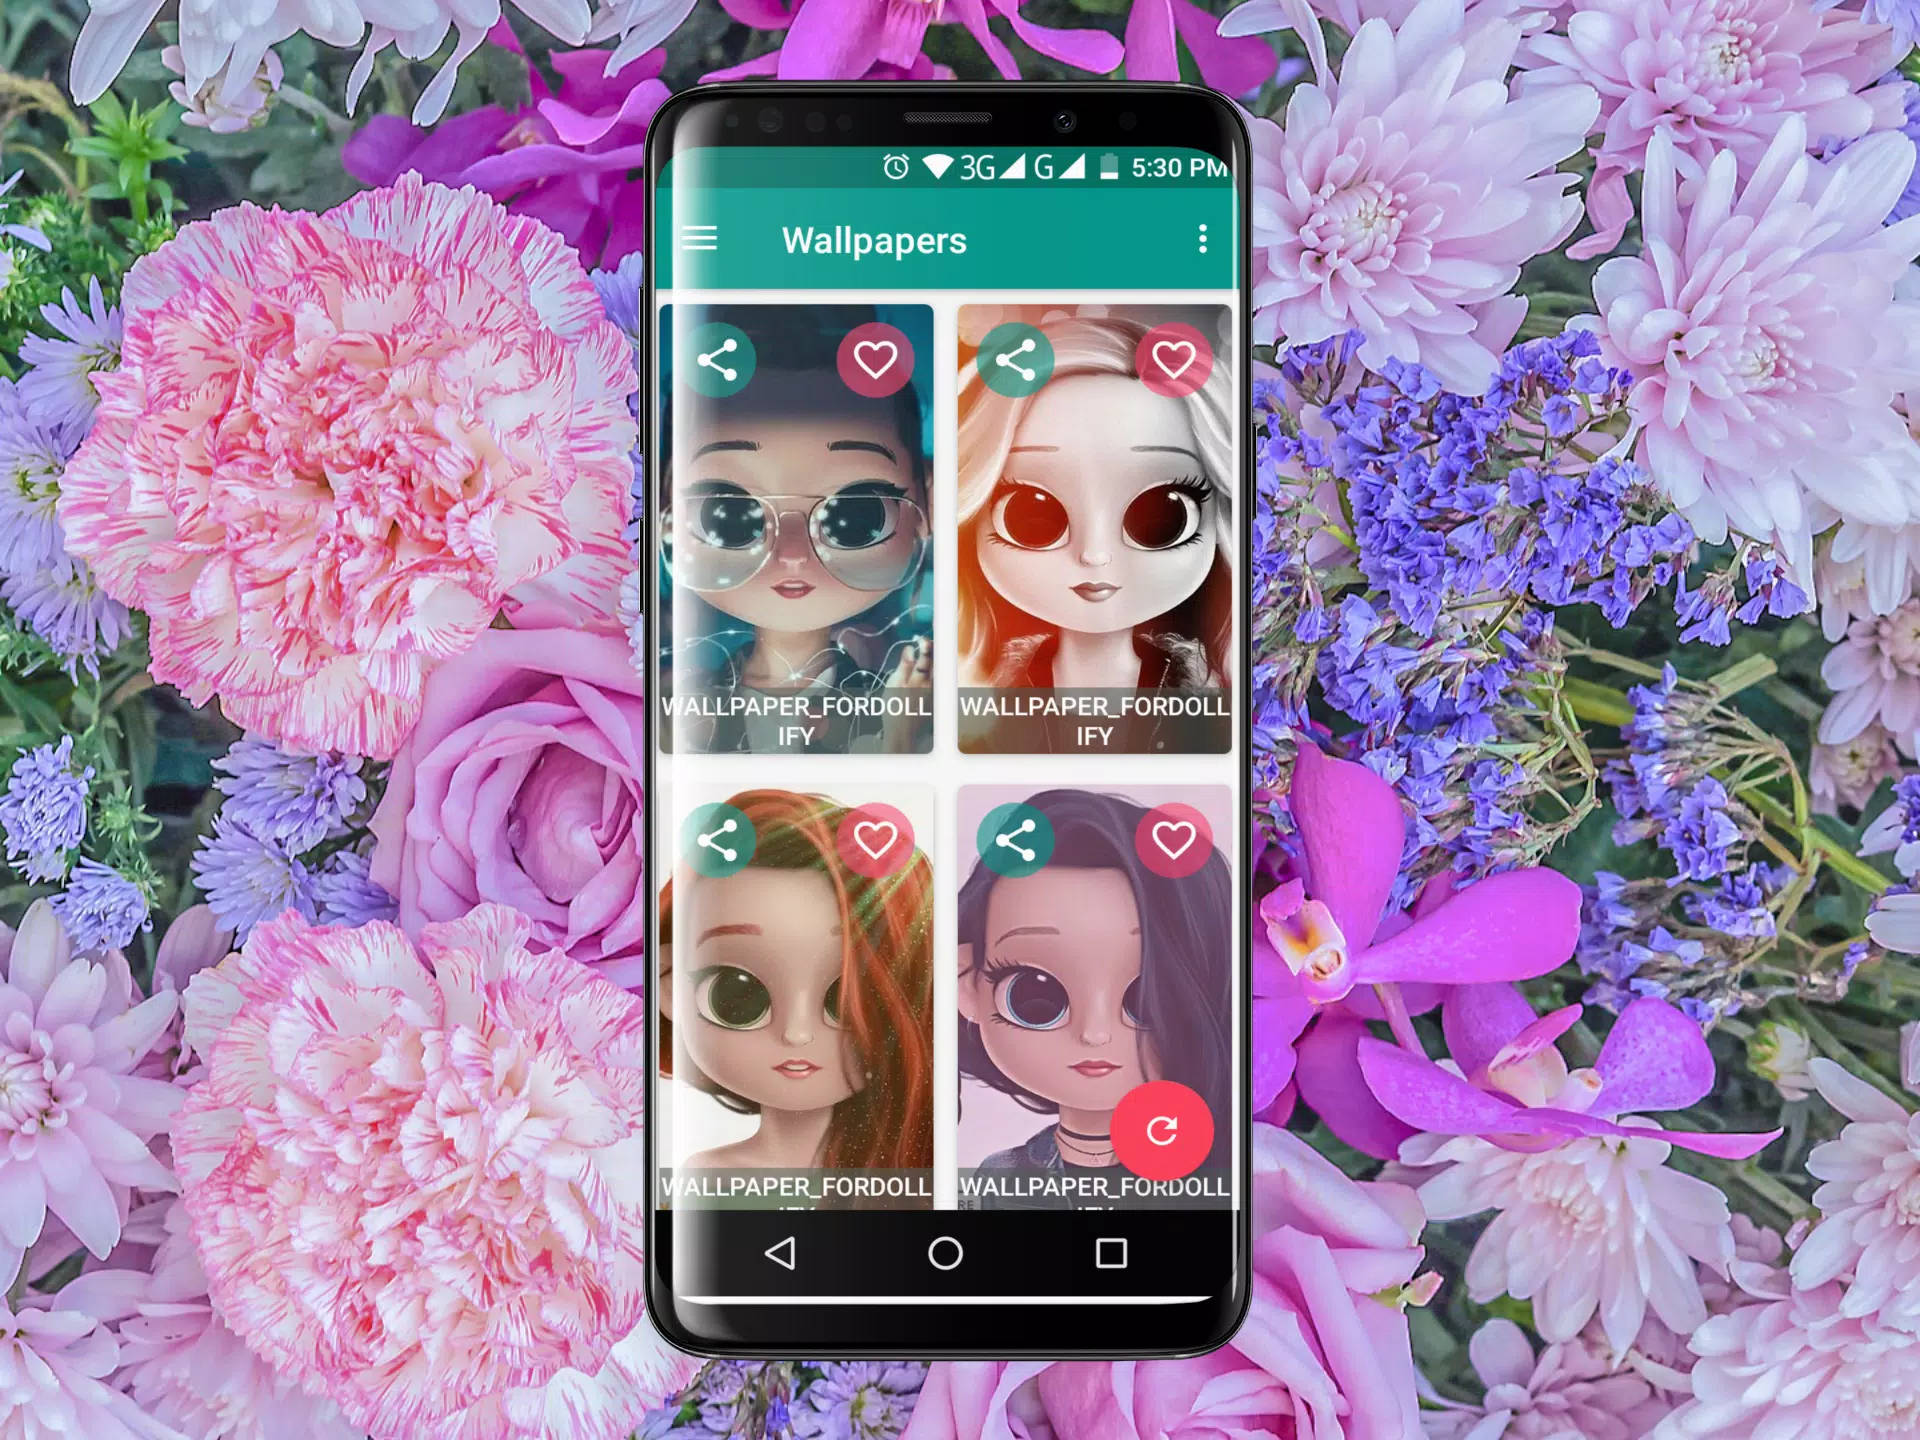 A Phone With A Pink Flower Background And A Cartoon Character Wallpaper